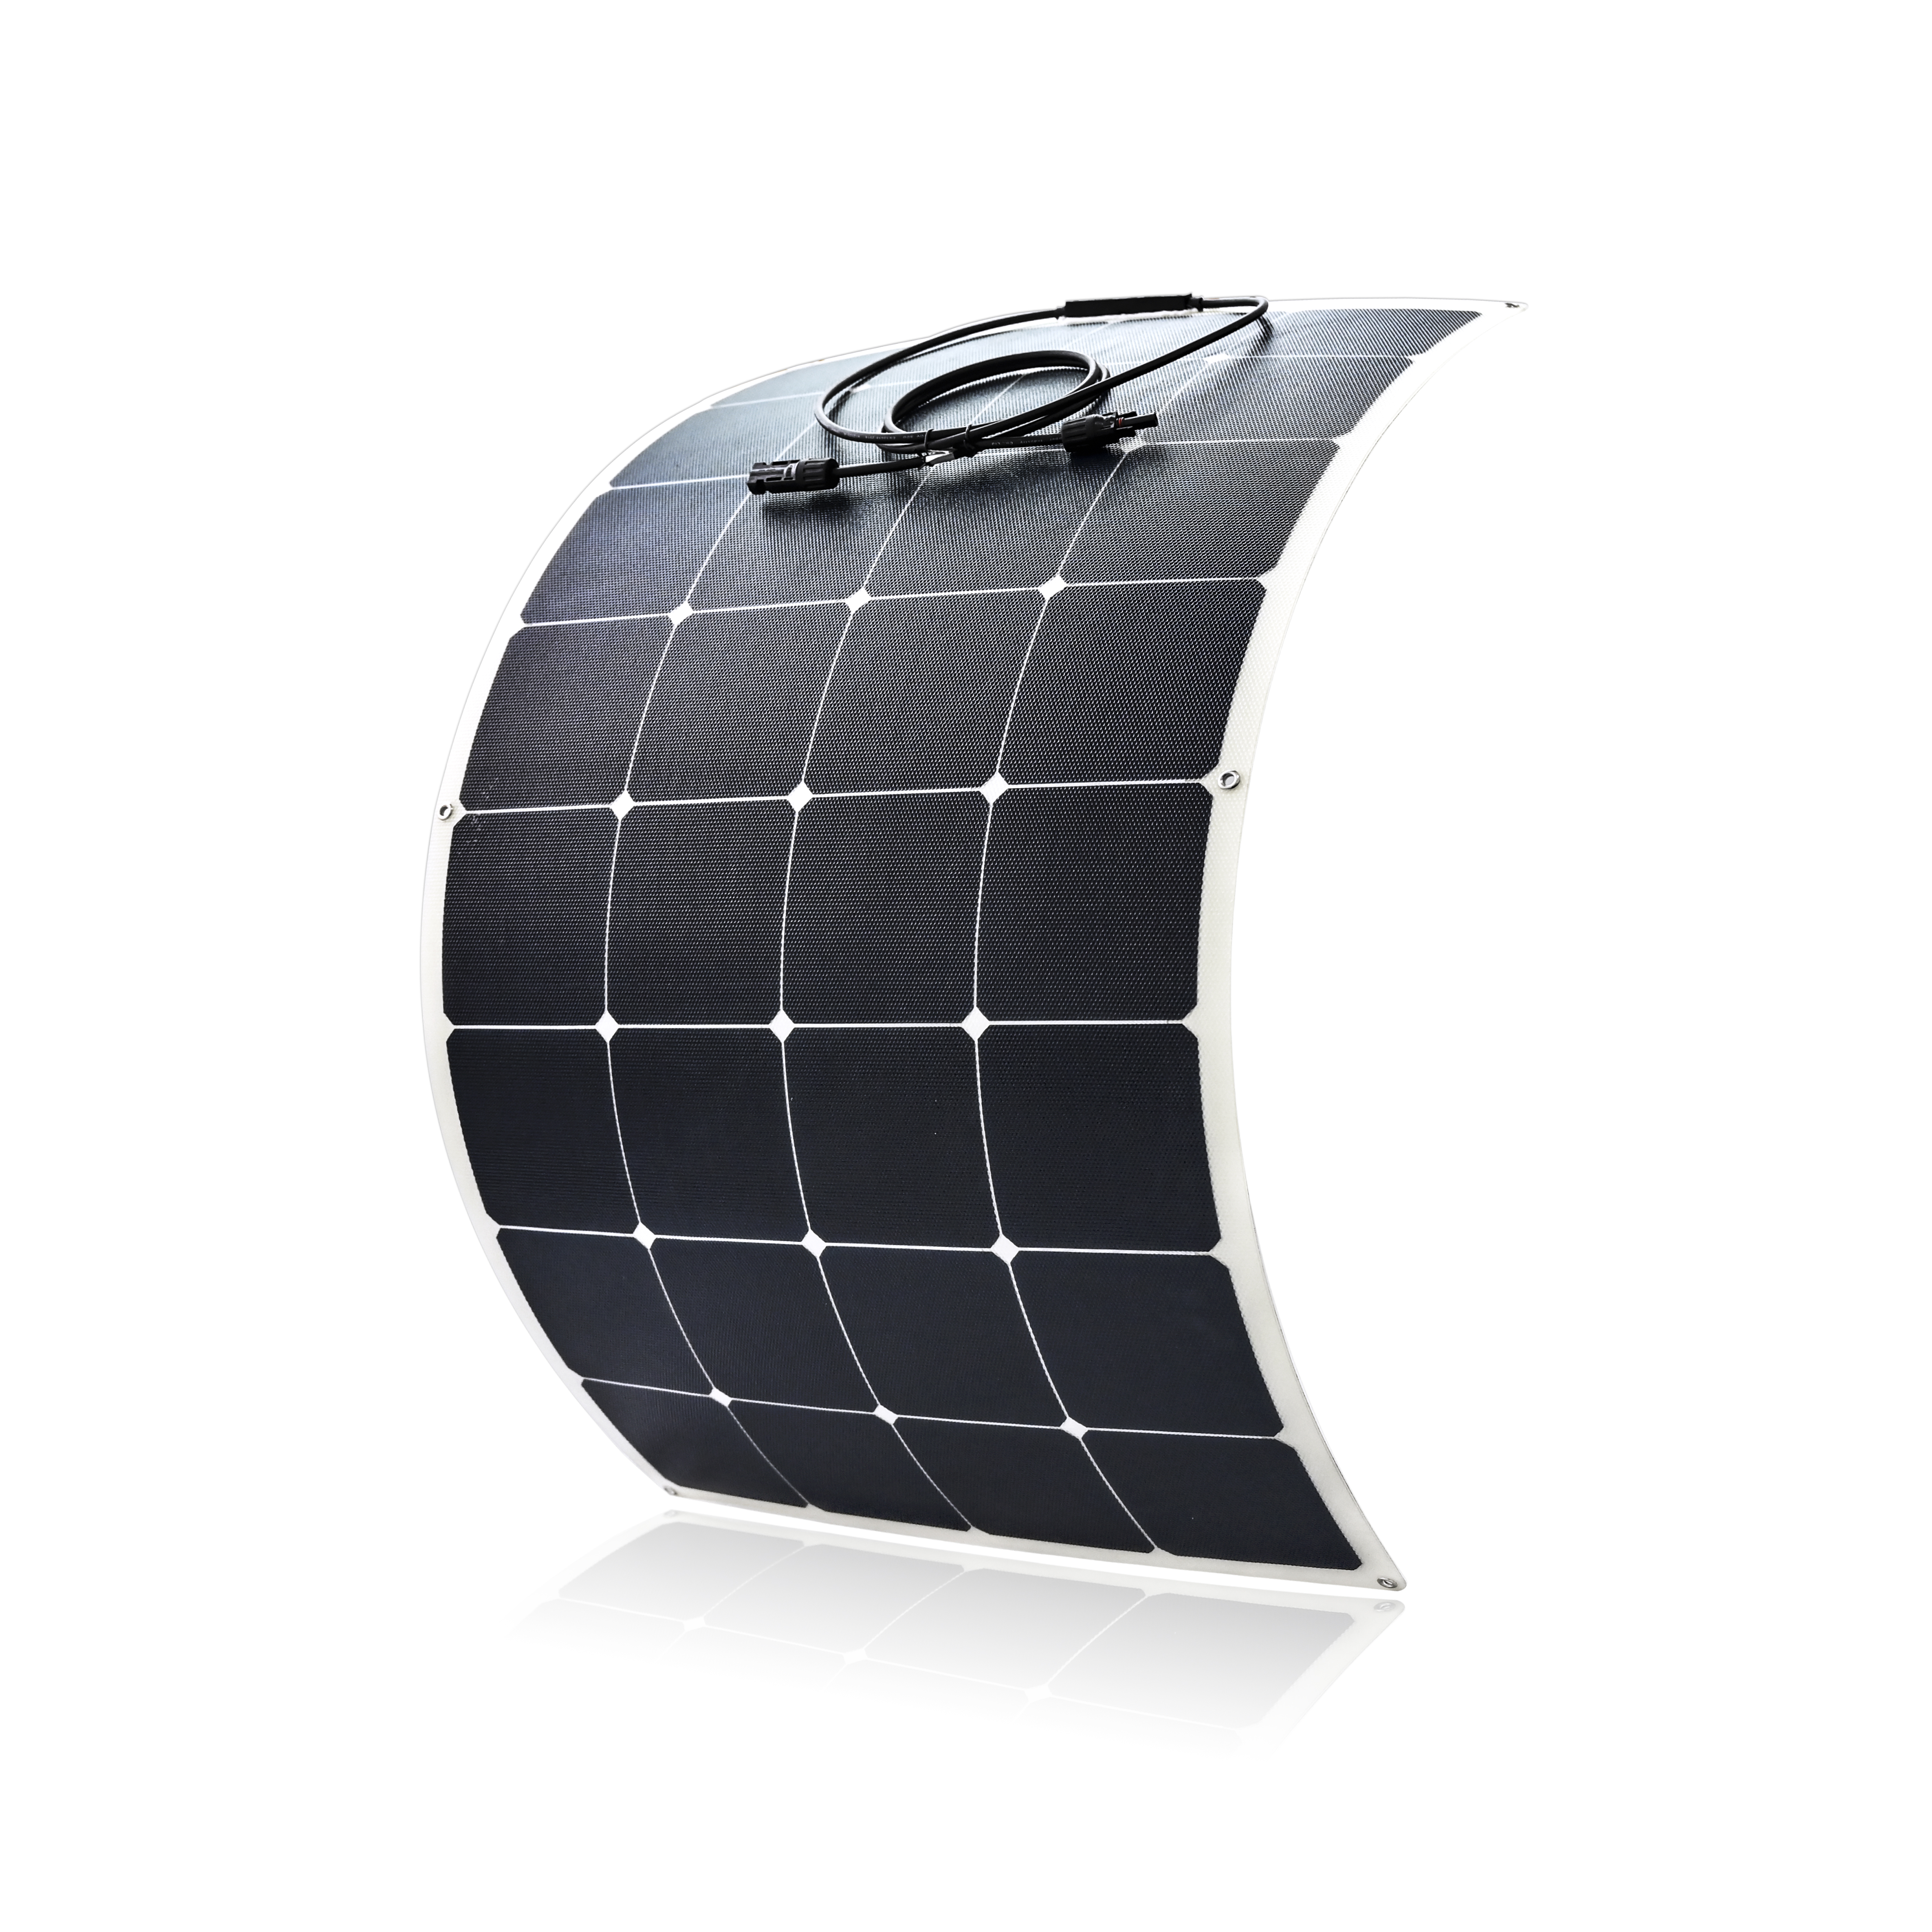 Sungold New Product Release: TF Glasfreies Solarmodul